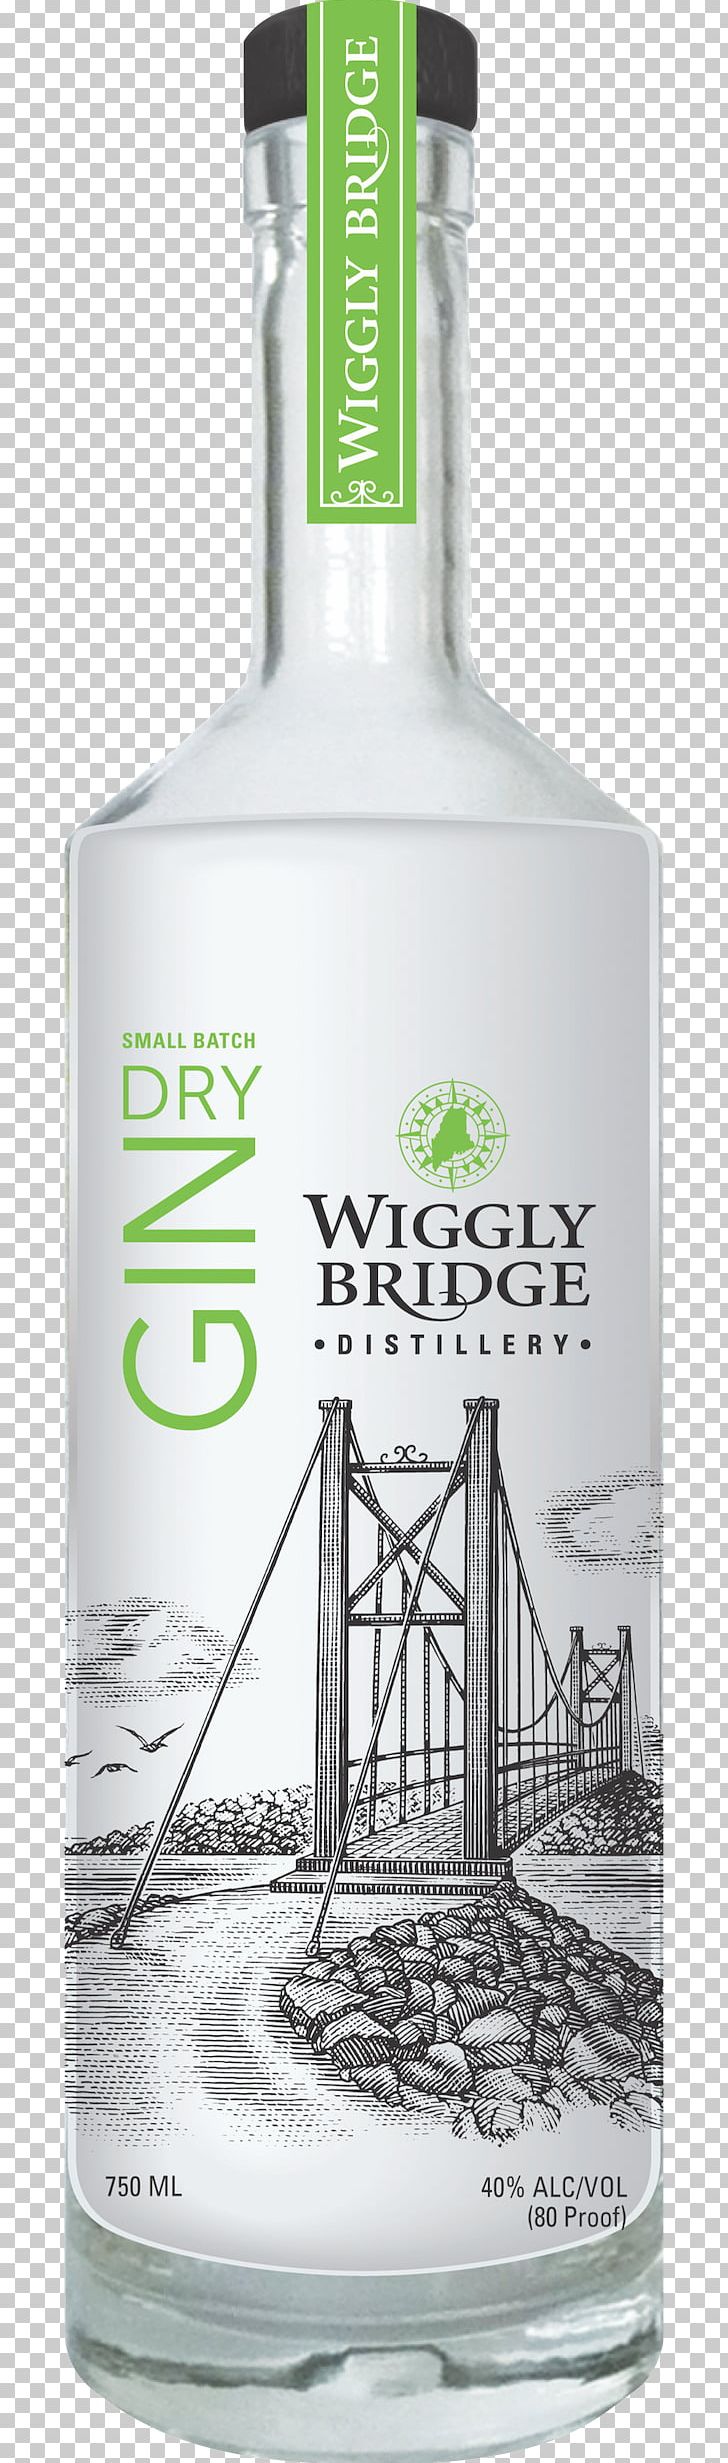 Distilled Beverage Bourbon Whiskey Rye Whiskey Gin PNG, Clipart, Alcoholic Beverage, Alcohol Proof, Bottle, Bourbon Whiskey, Bridge Free PNG Download